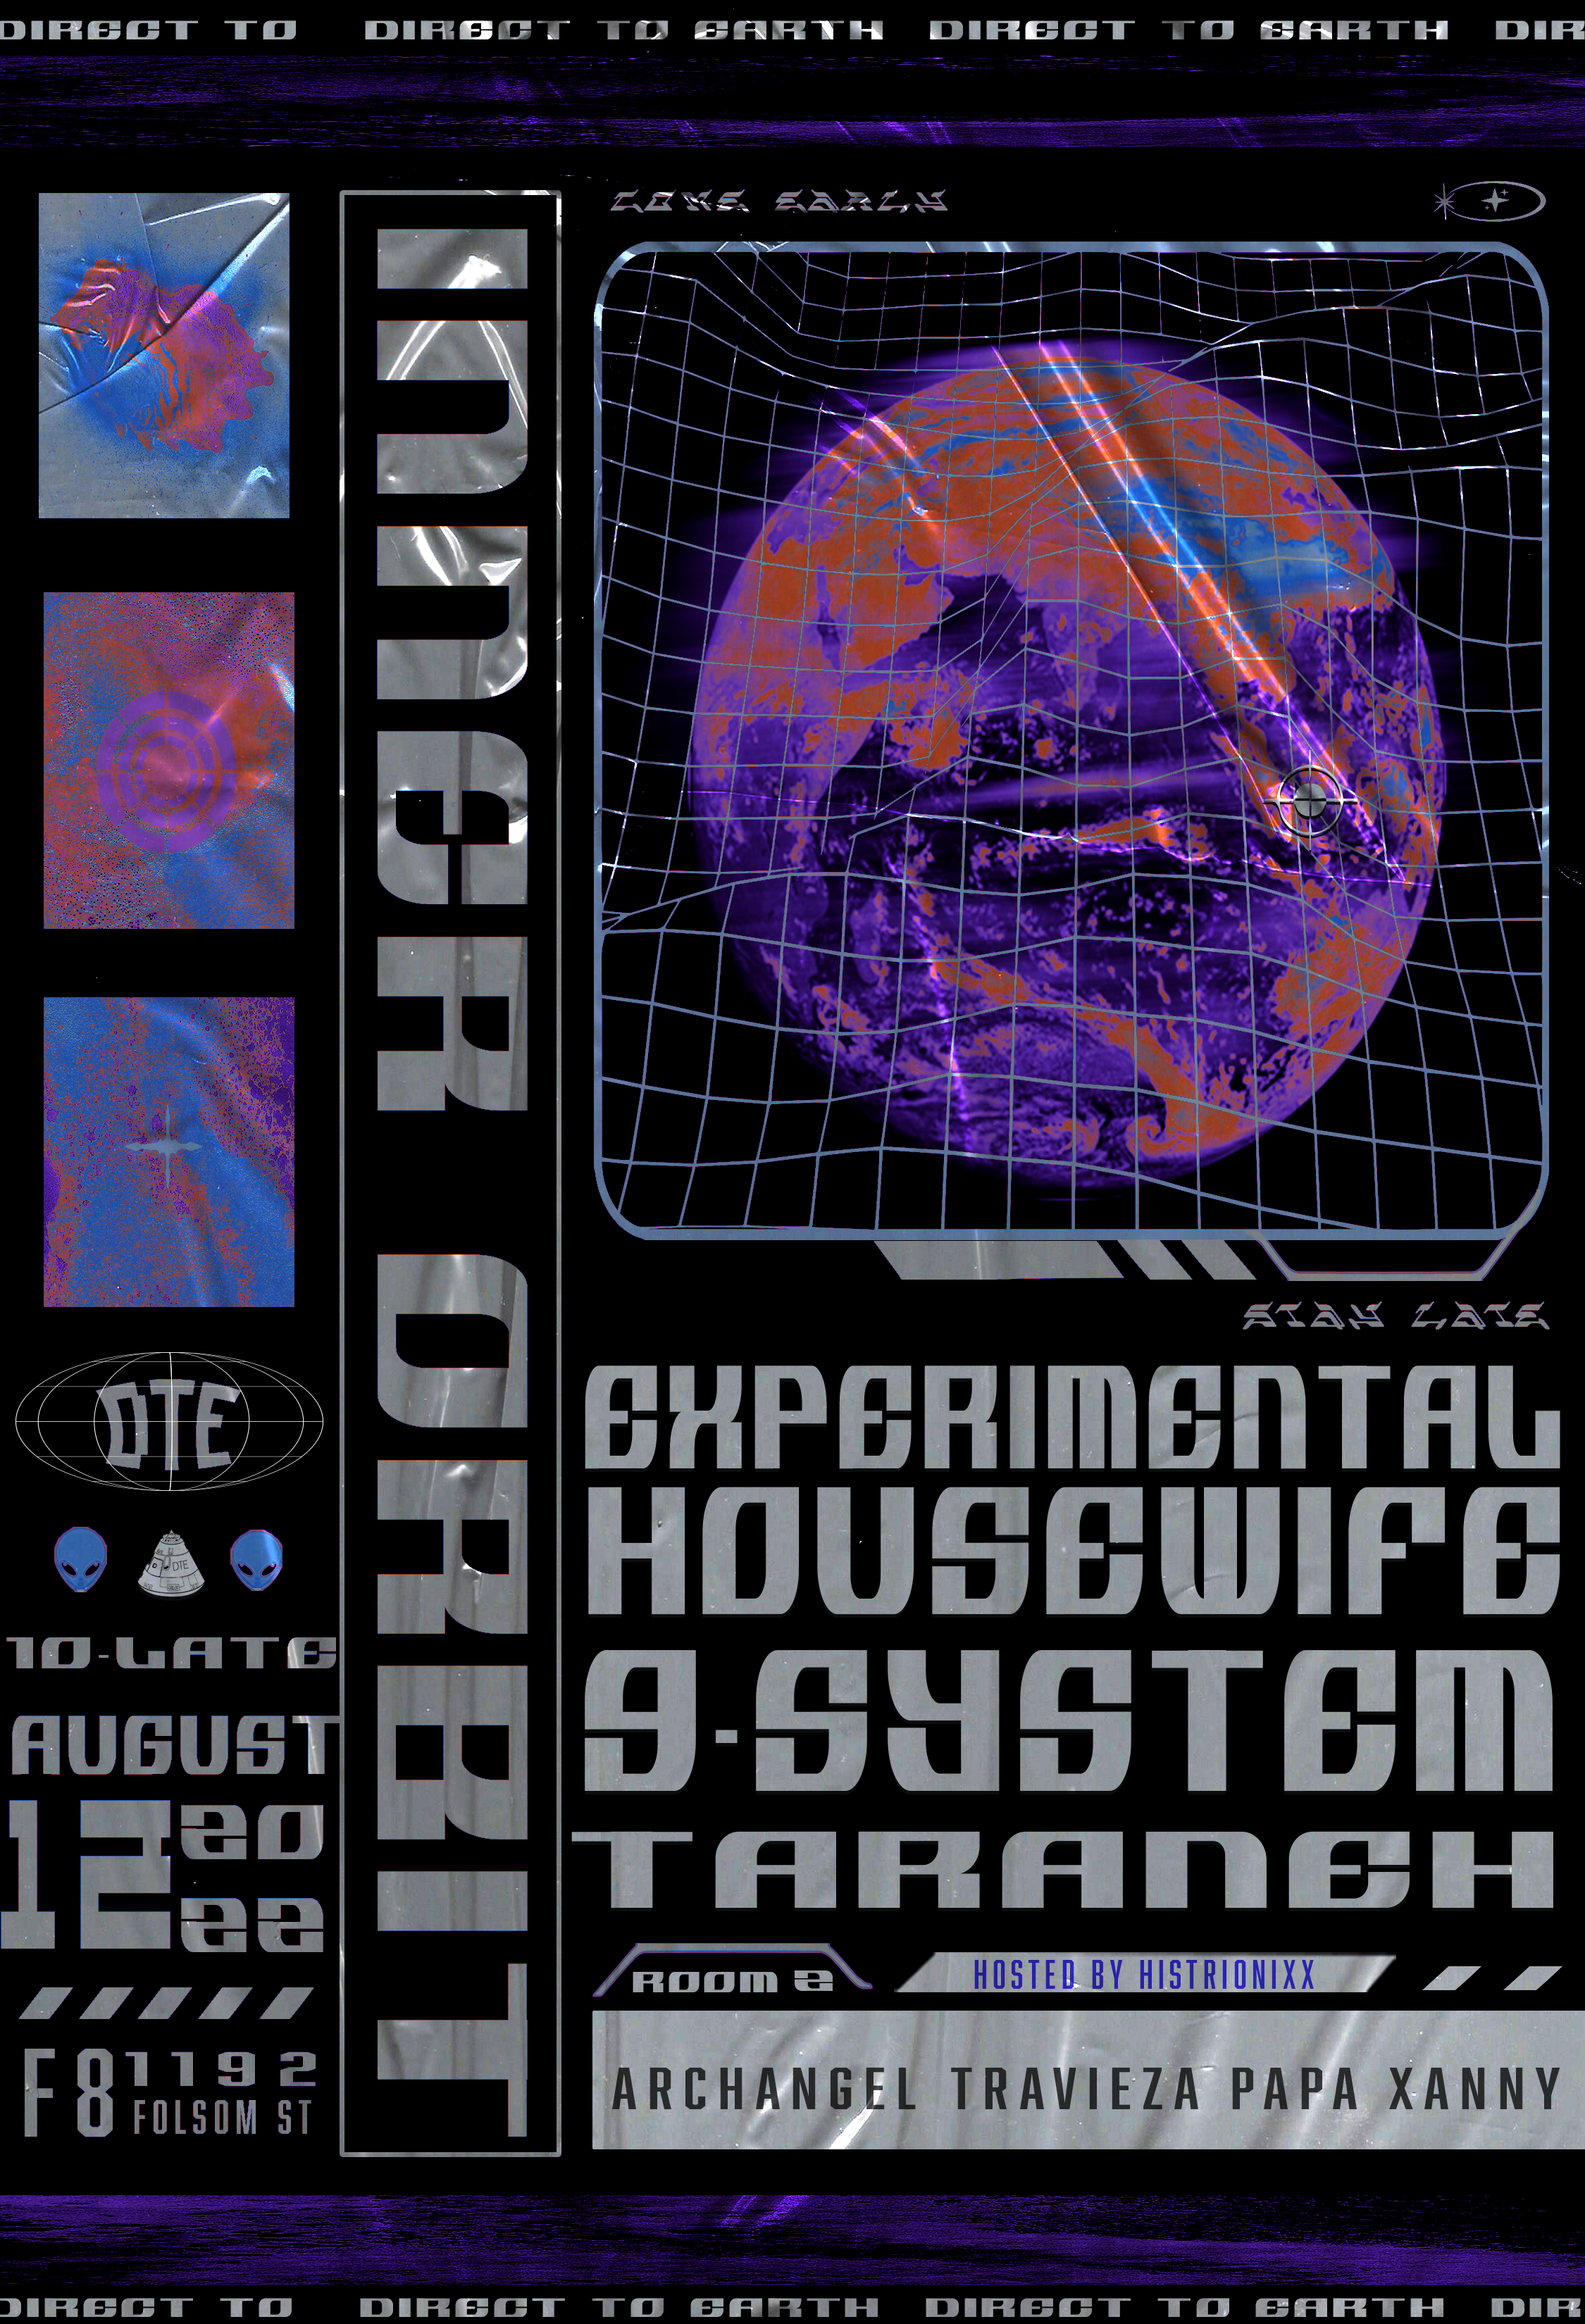 DTE presents Inner Orbit with Experimental Housewife, Histrionixx, 9-System and Tareneh - Página frontal